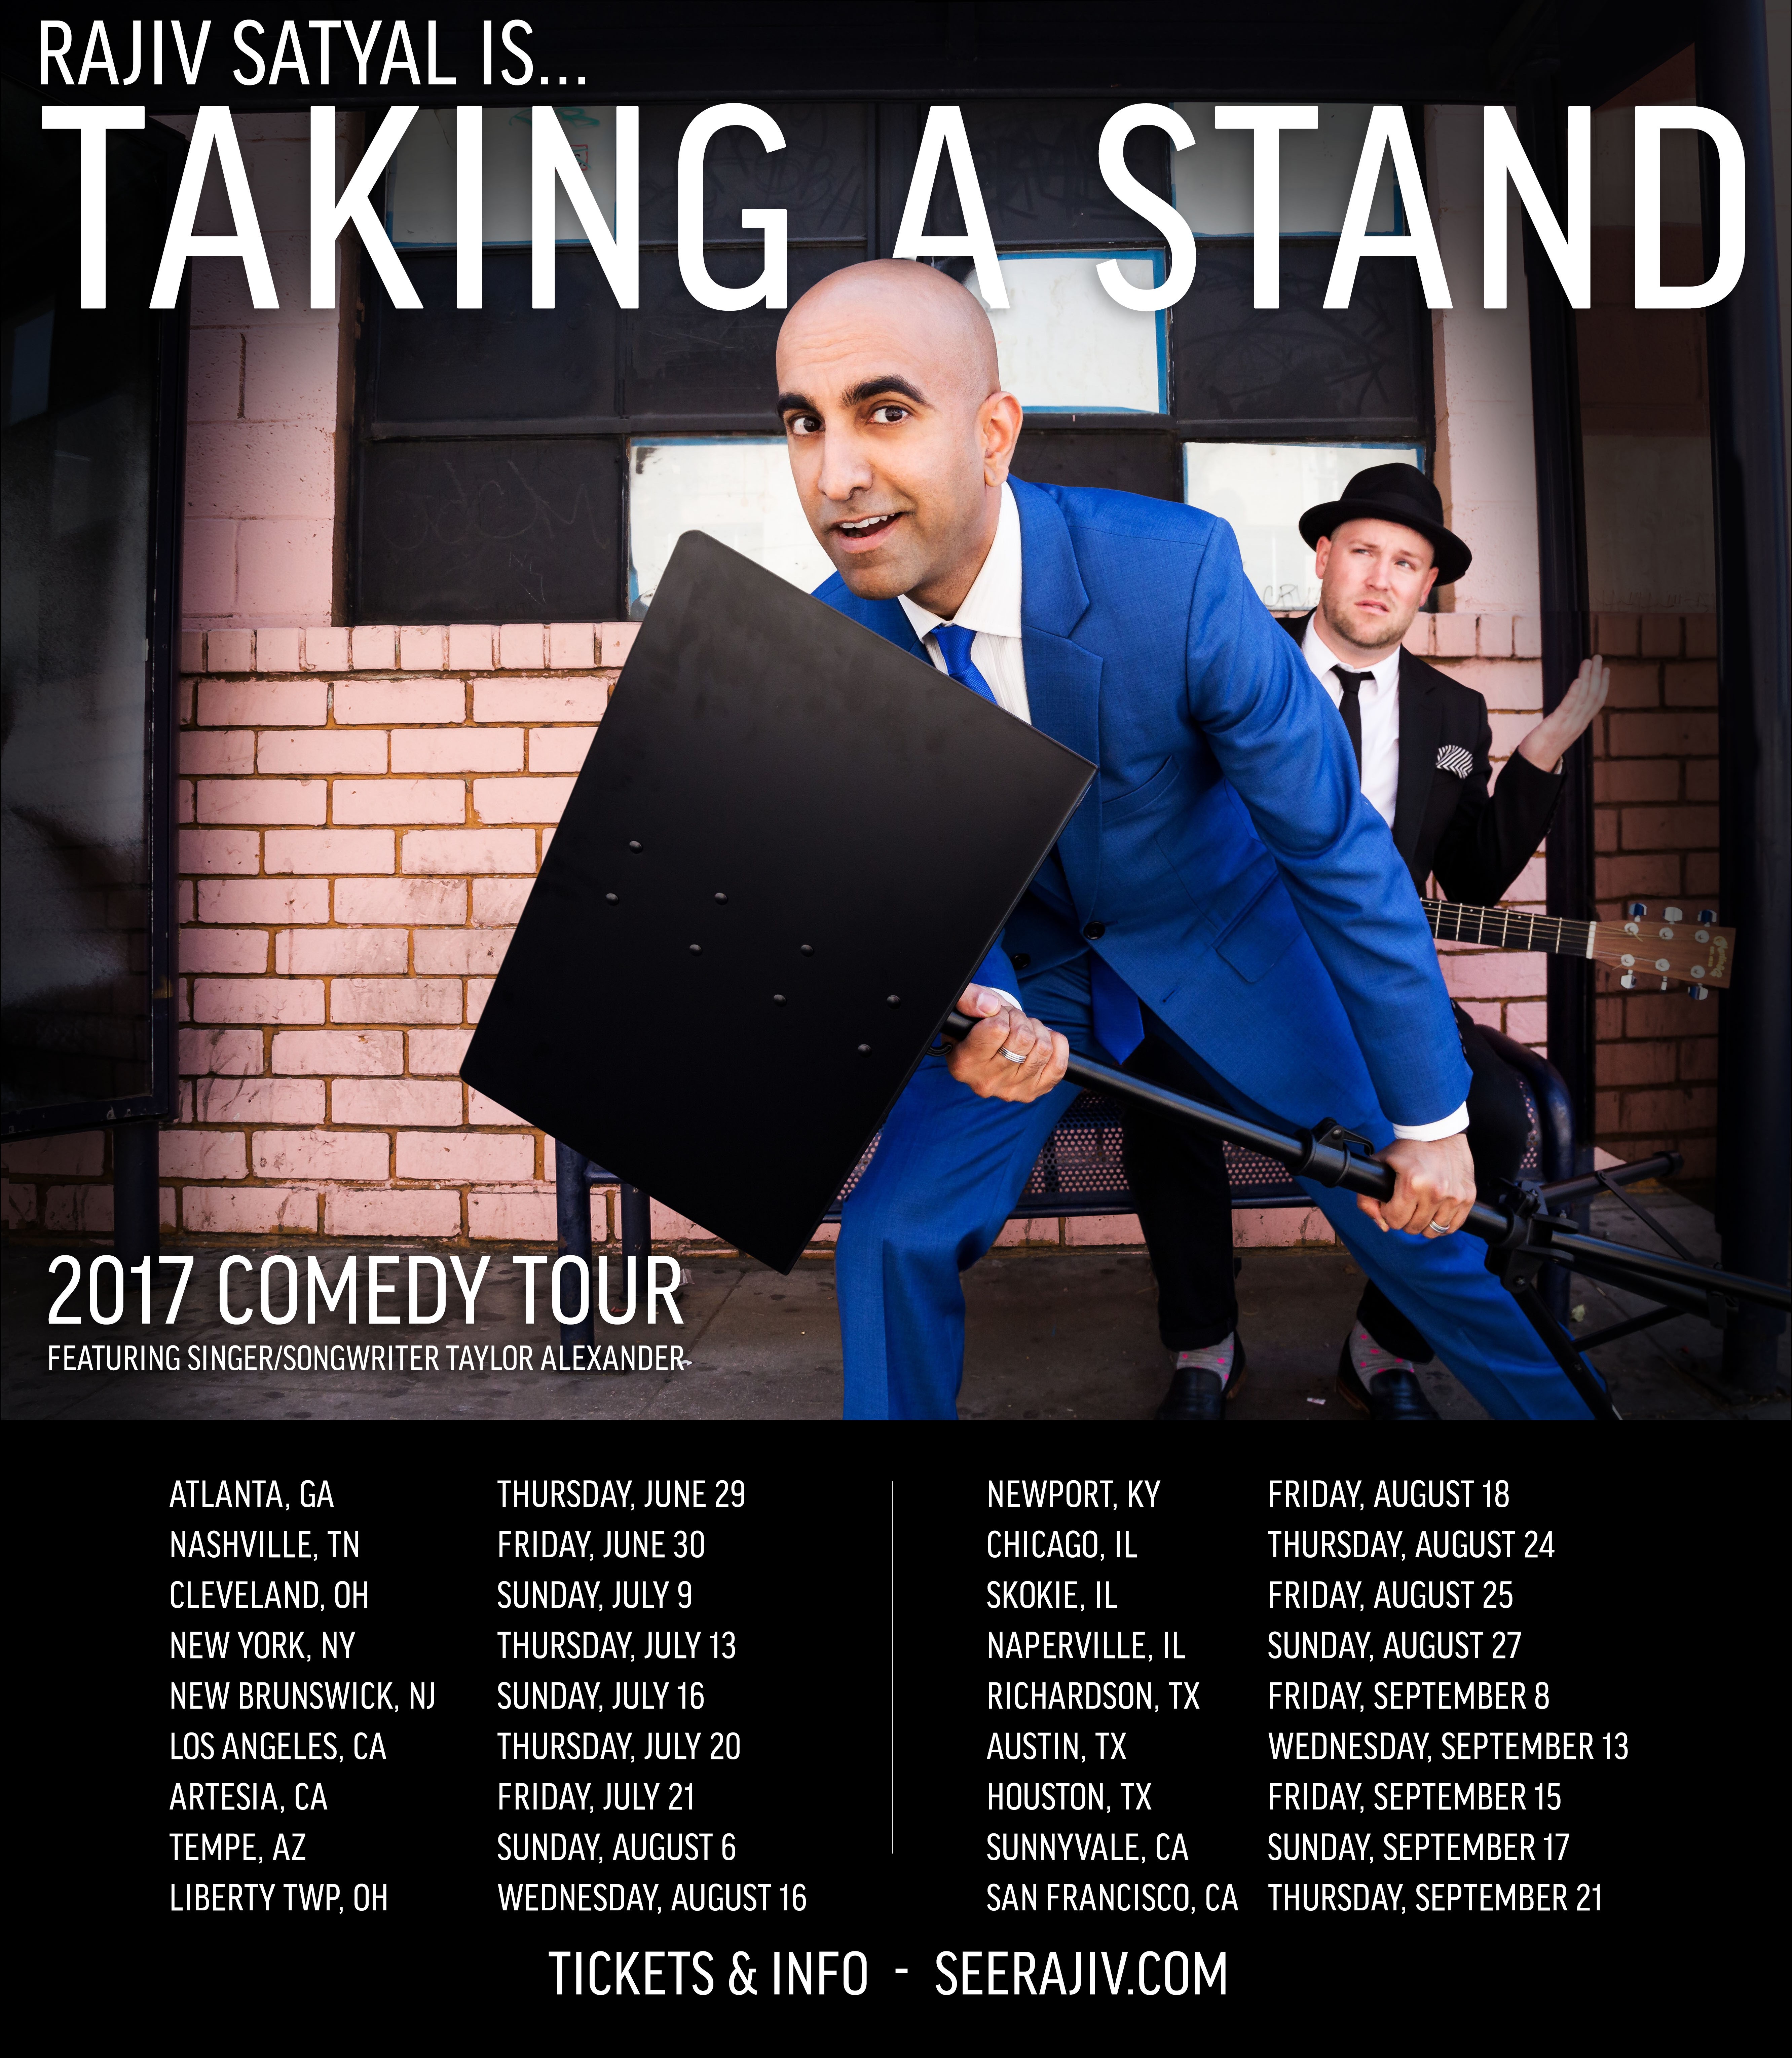 Get Your Laugh on With the Rajiv Taking a Stand Comedy Tour